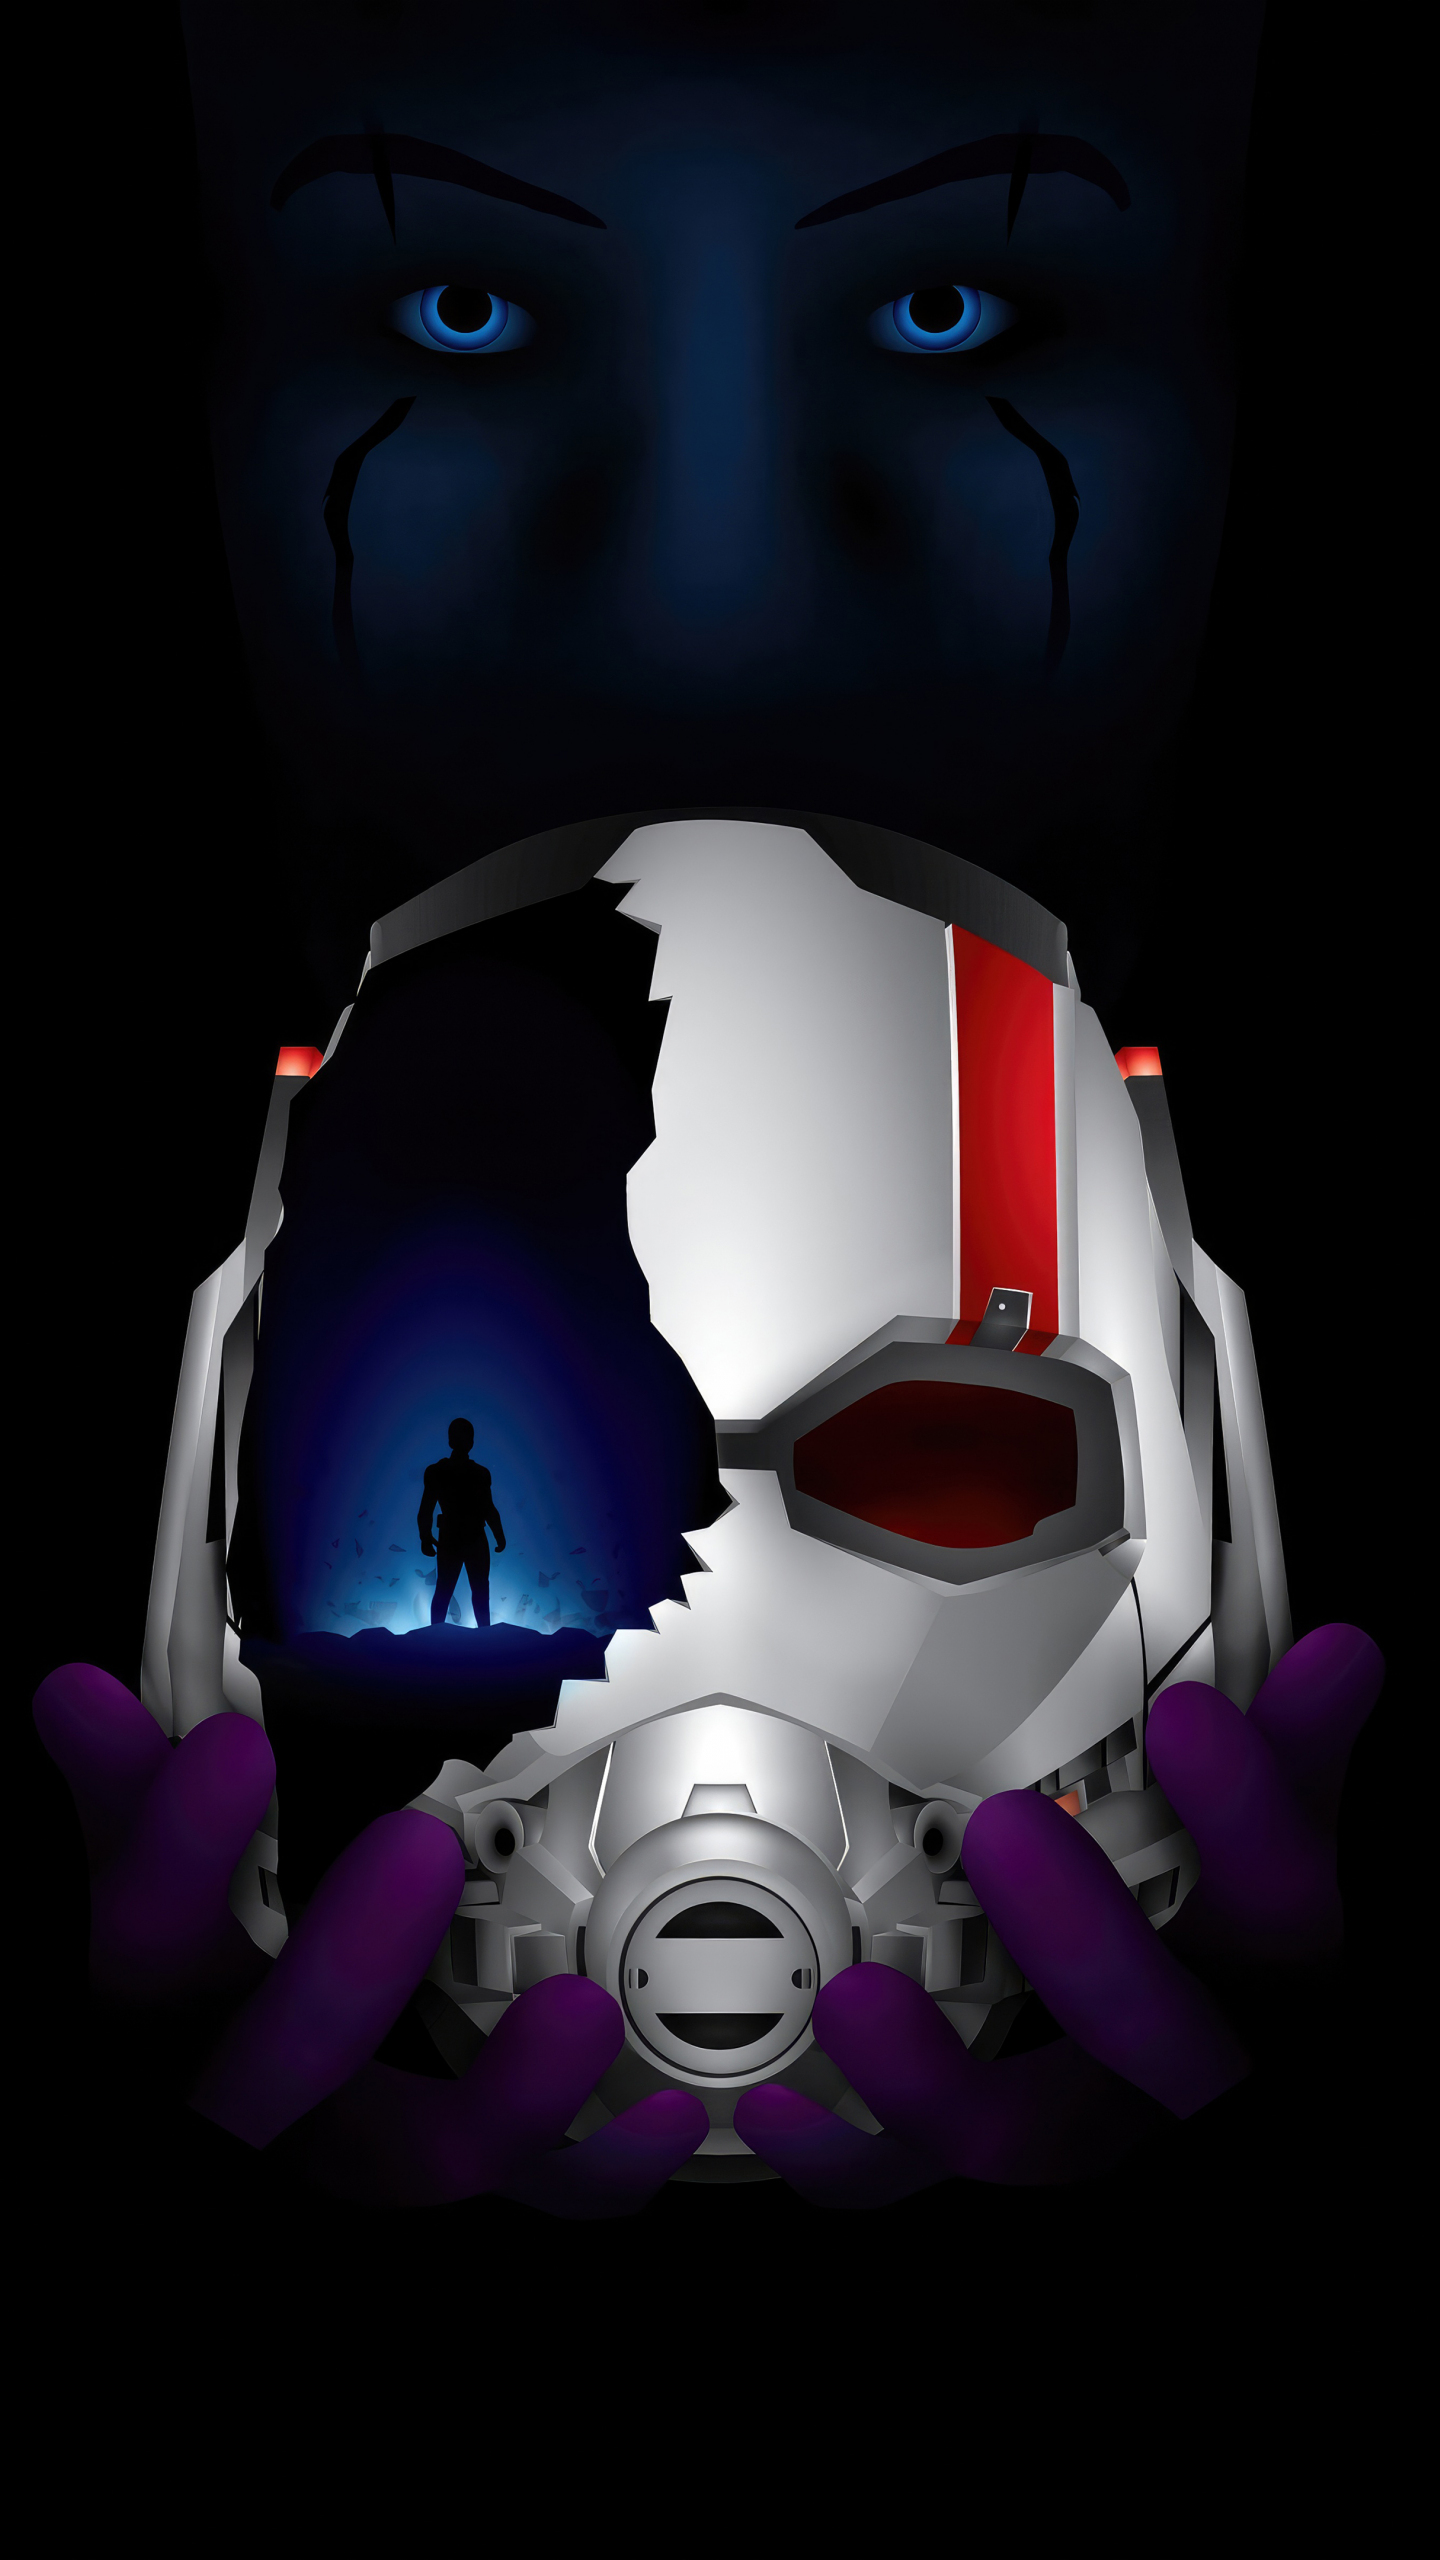 Antman Helmet and Kang the Conqueror, movie, dark poster, 1440x2560 wallpaper